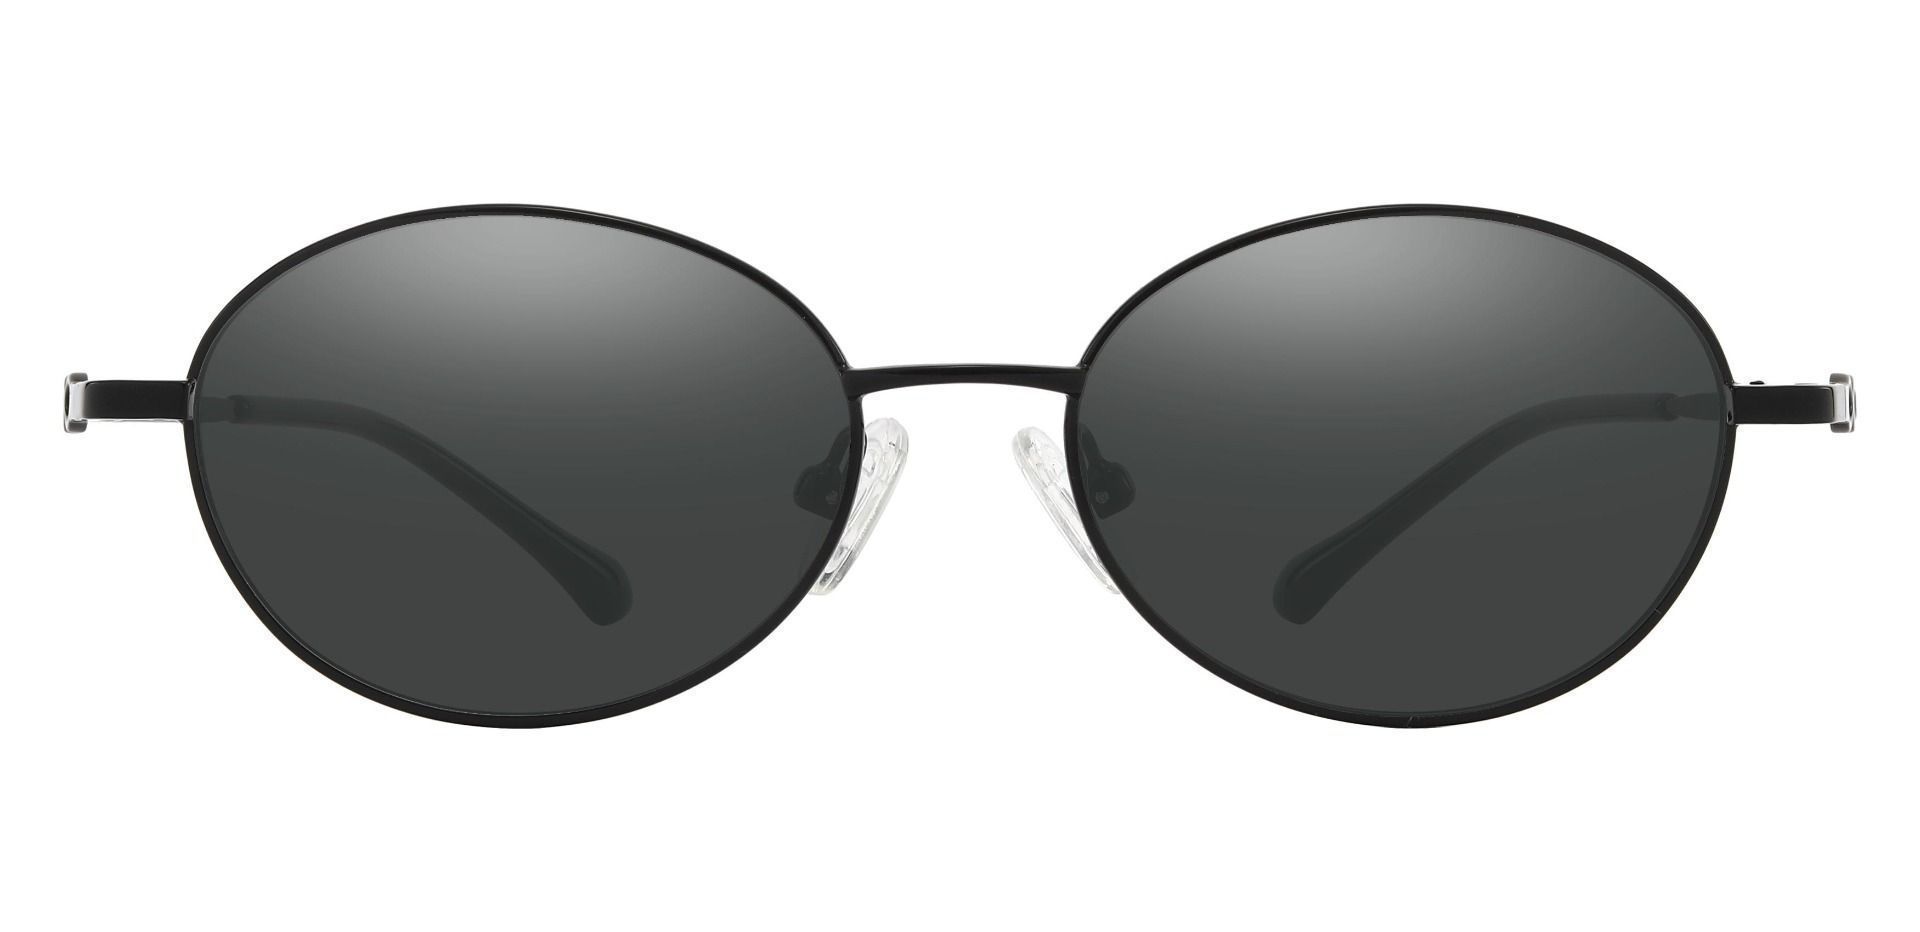 Odyssey Oval Reading Sunglasses - Black Frame With Gray Lenses